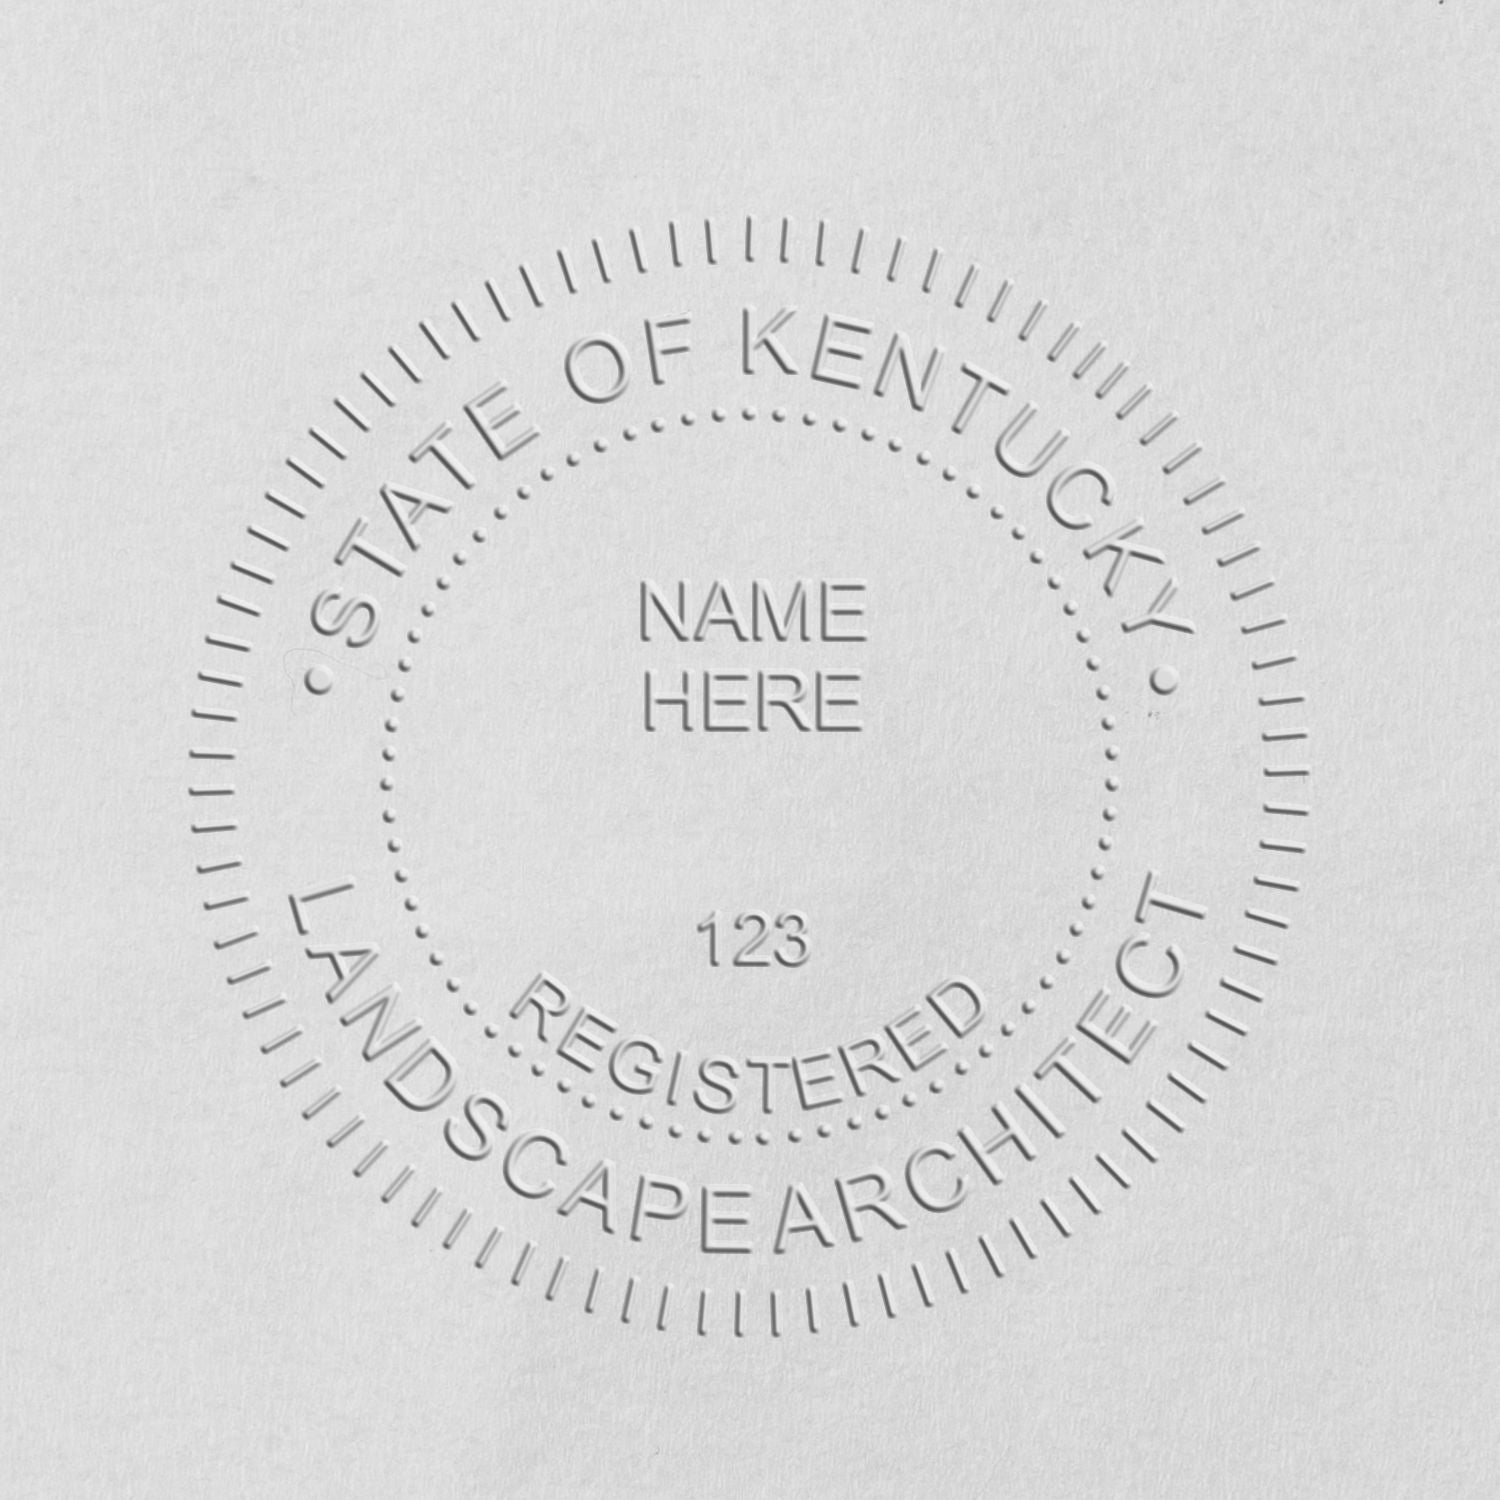 A photograph of the State of Kentucky Handheld Landscape Architect Seal stamp impression reveals a vivid, professional image of the on paper.